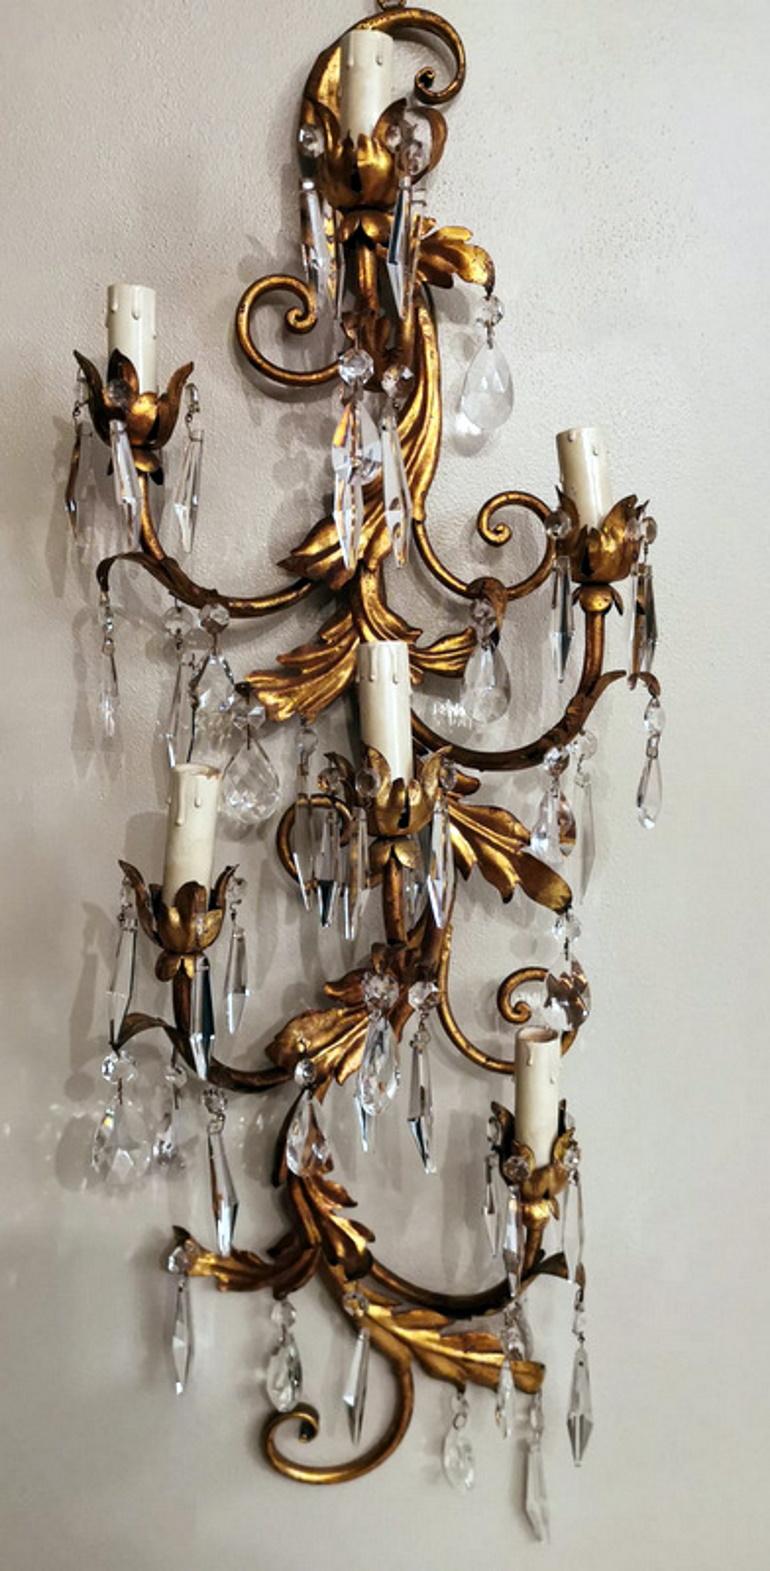 Huge and charming Italian wall sconce; it has six light points with fake candles; the main structure, sturdy and well-proportioned, is made of the solid iron rod and the design follows a precise Rococo style with a soft curvilinear evolution and